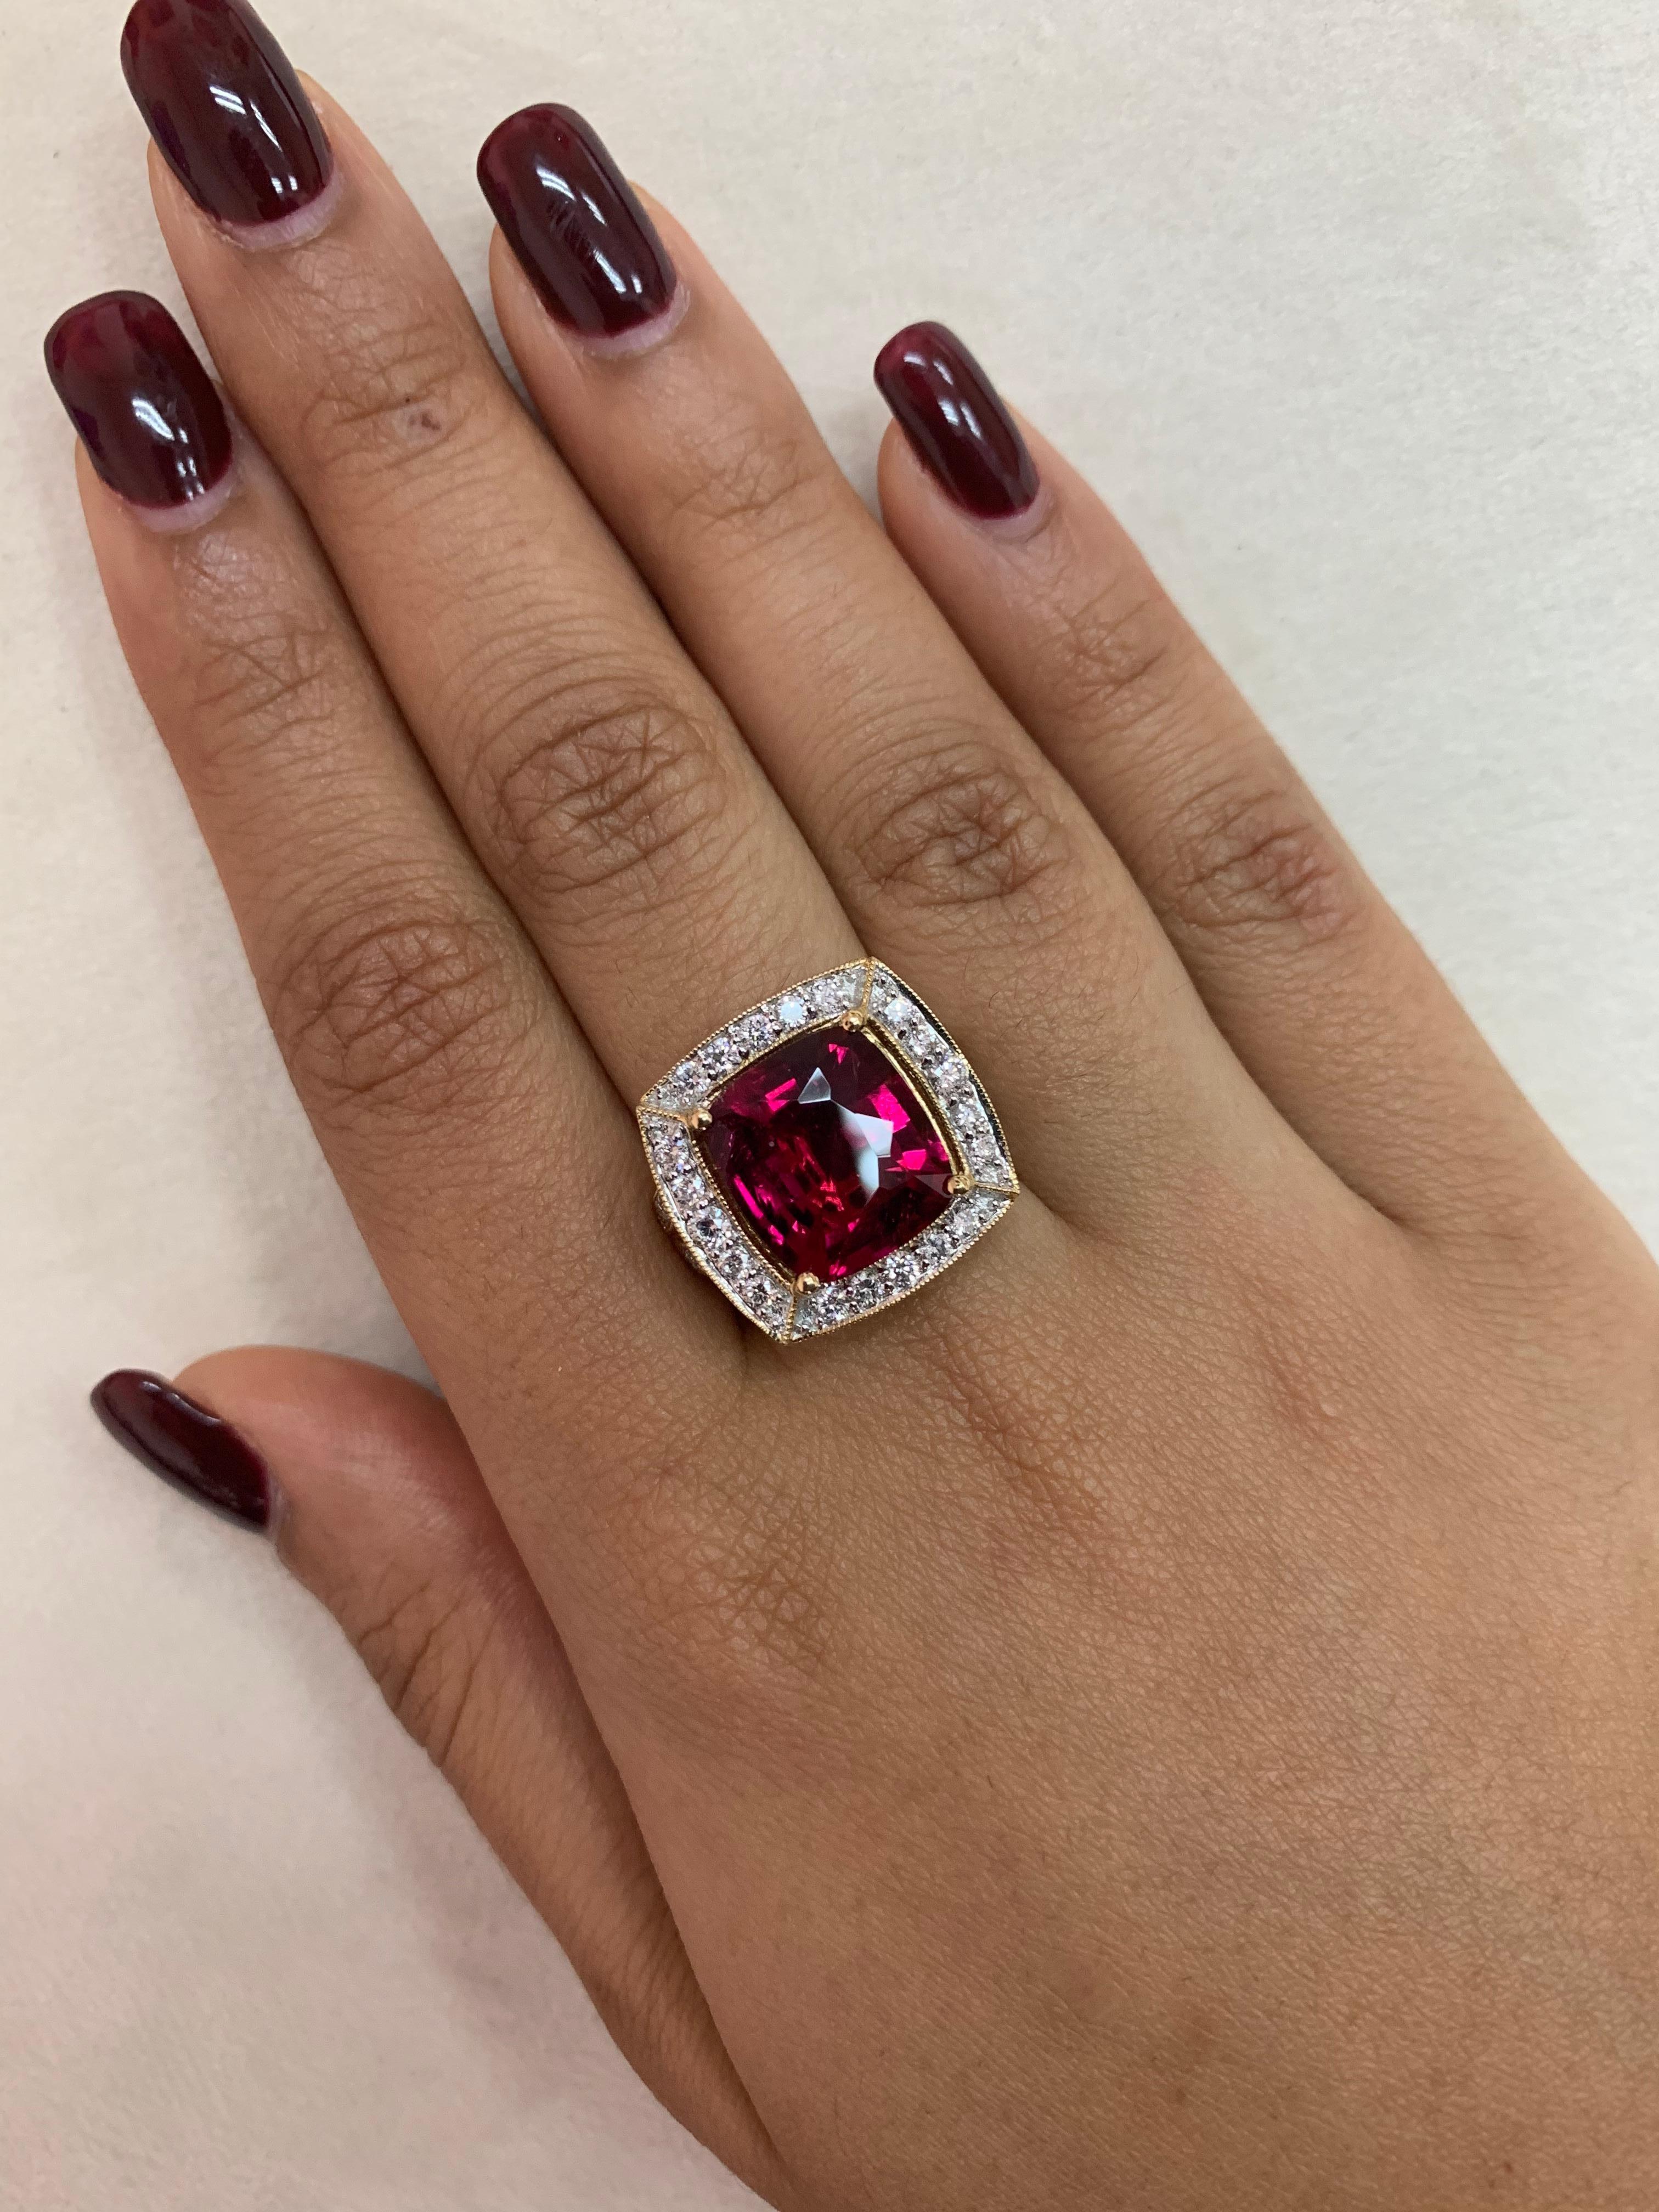 This collection of rings features the most radiant rubelite tourmalines. These gemstones show a magnificant and regal deep red colour, and the yellow gold and diamond accents makes these pieces a true show stopper. 

Classic rubelite tourmaline ring